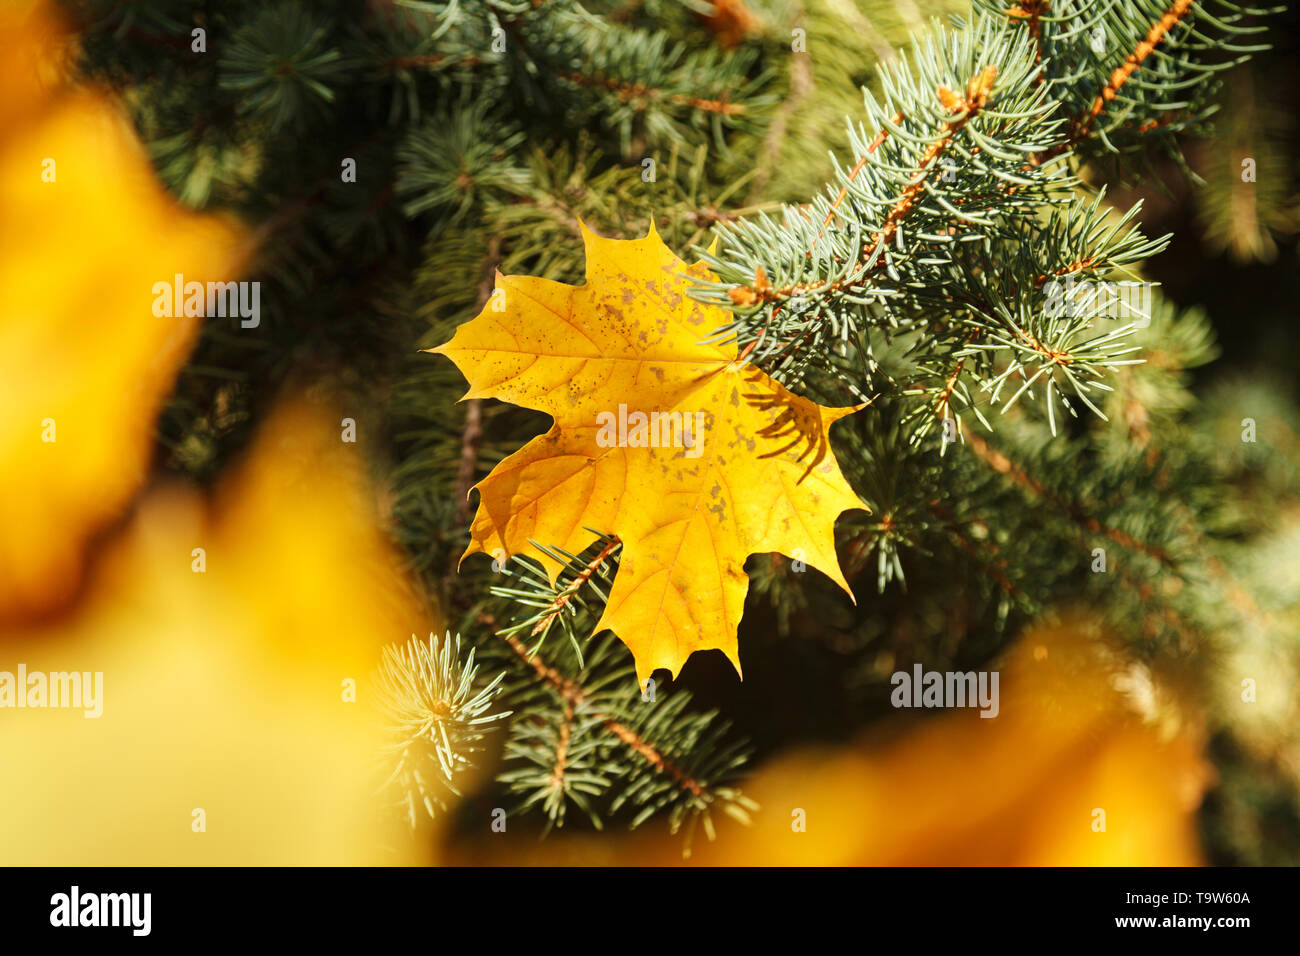 Through the yellow foliage you can see a single Golden maple leaf clinging to the branches of a blue spruce. The concept of the fall season. Stock Photo